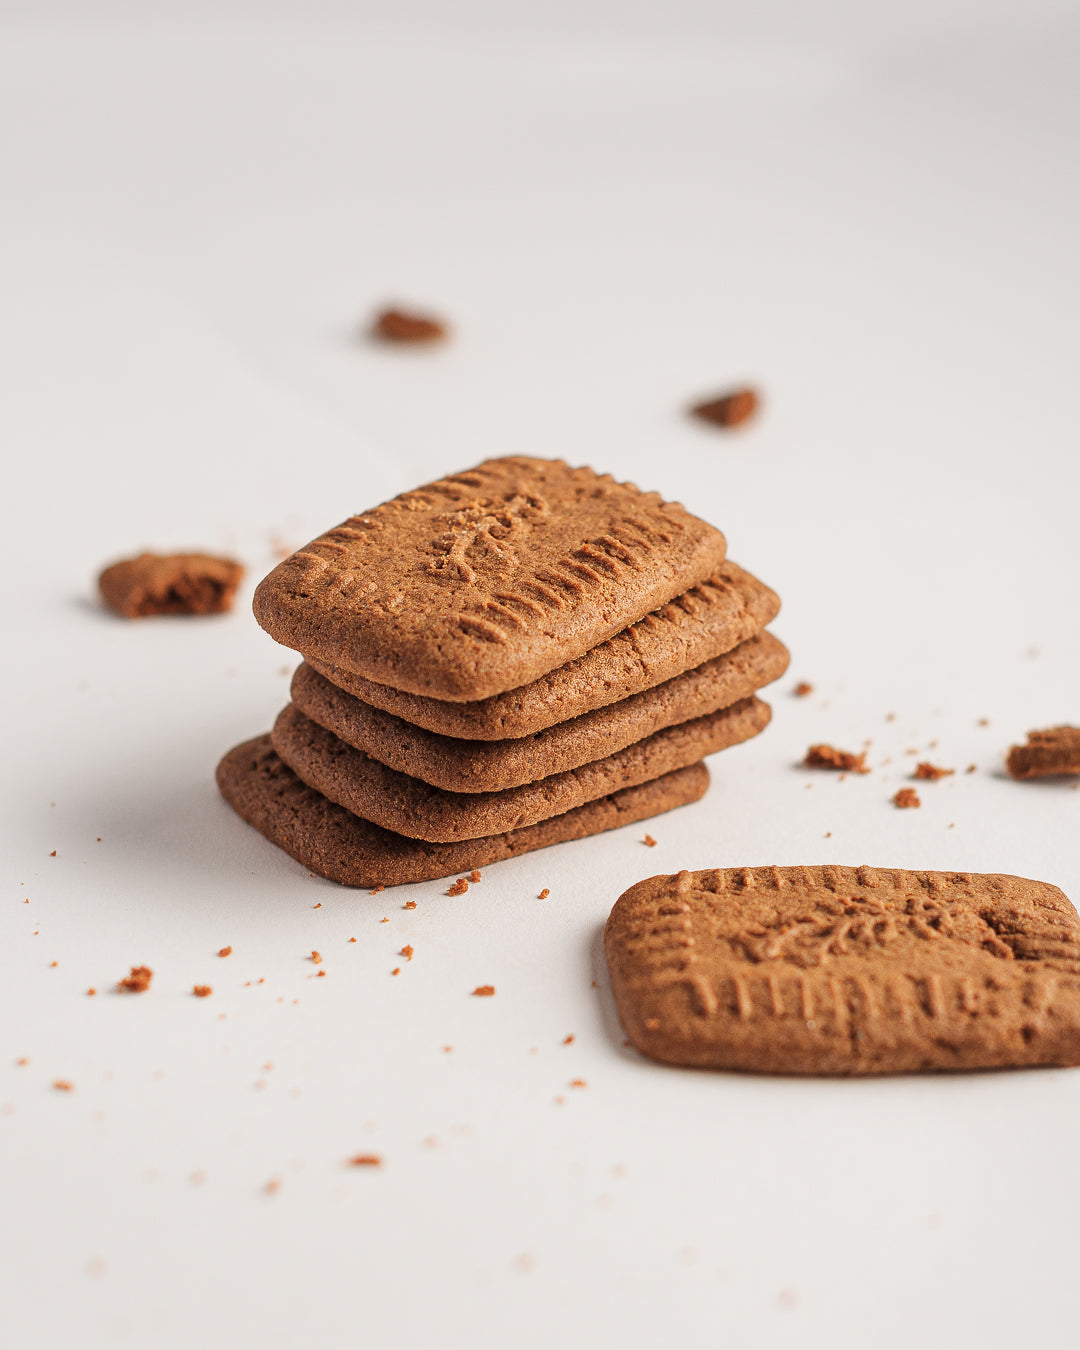 Spiced biscuit